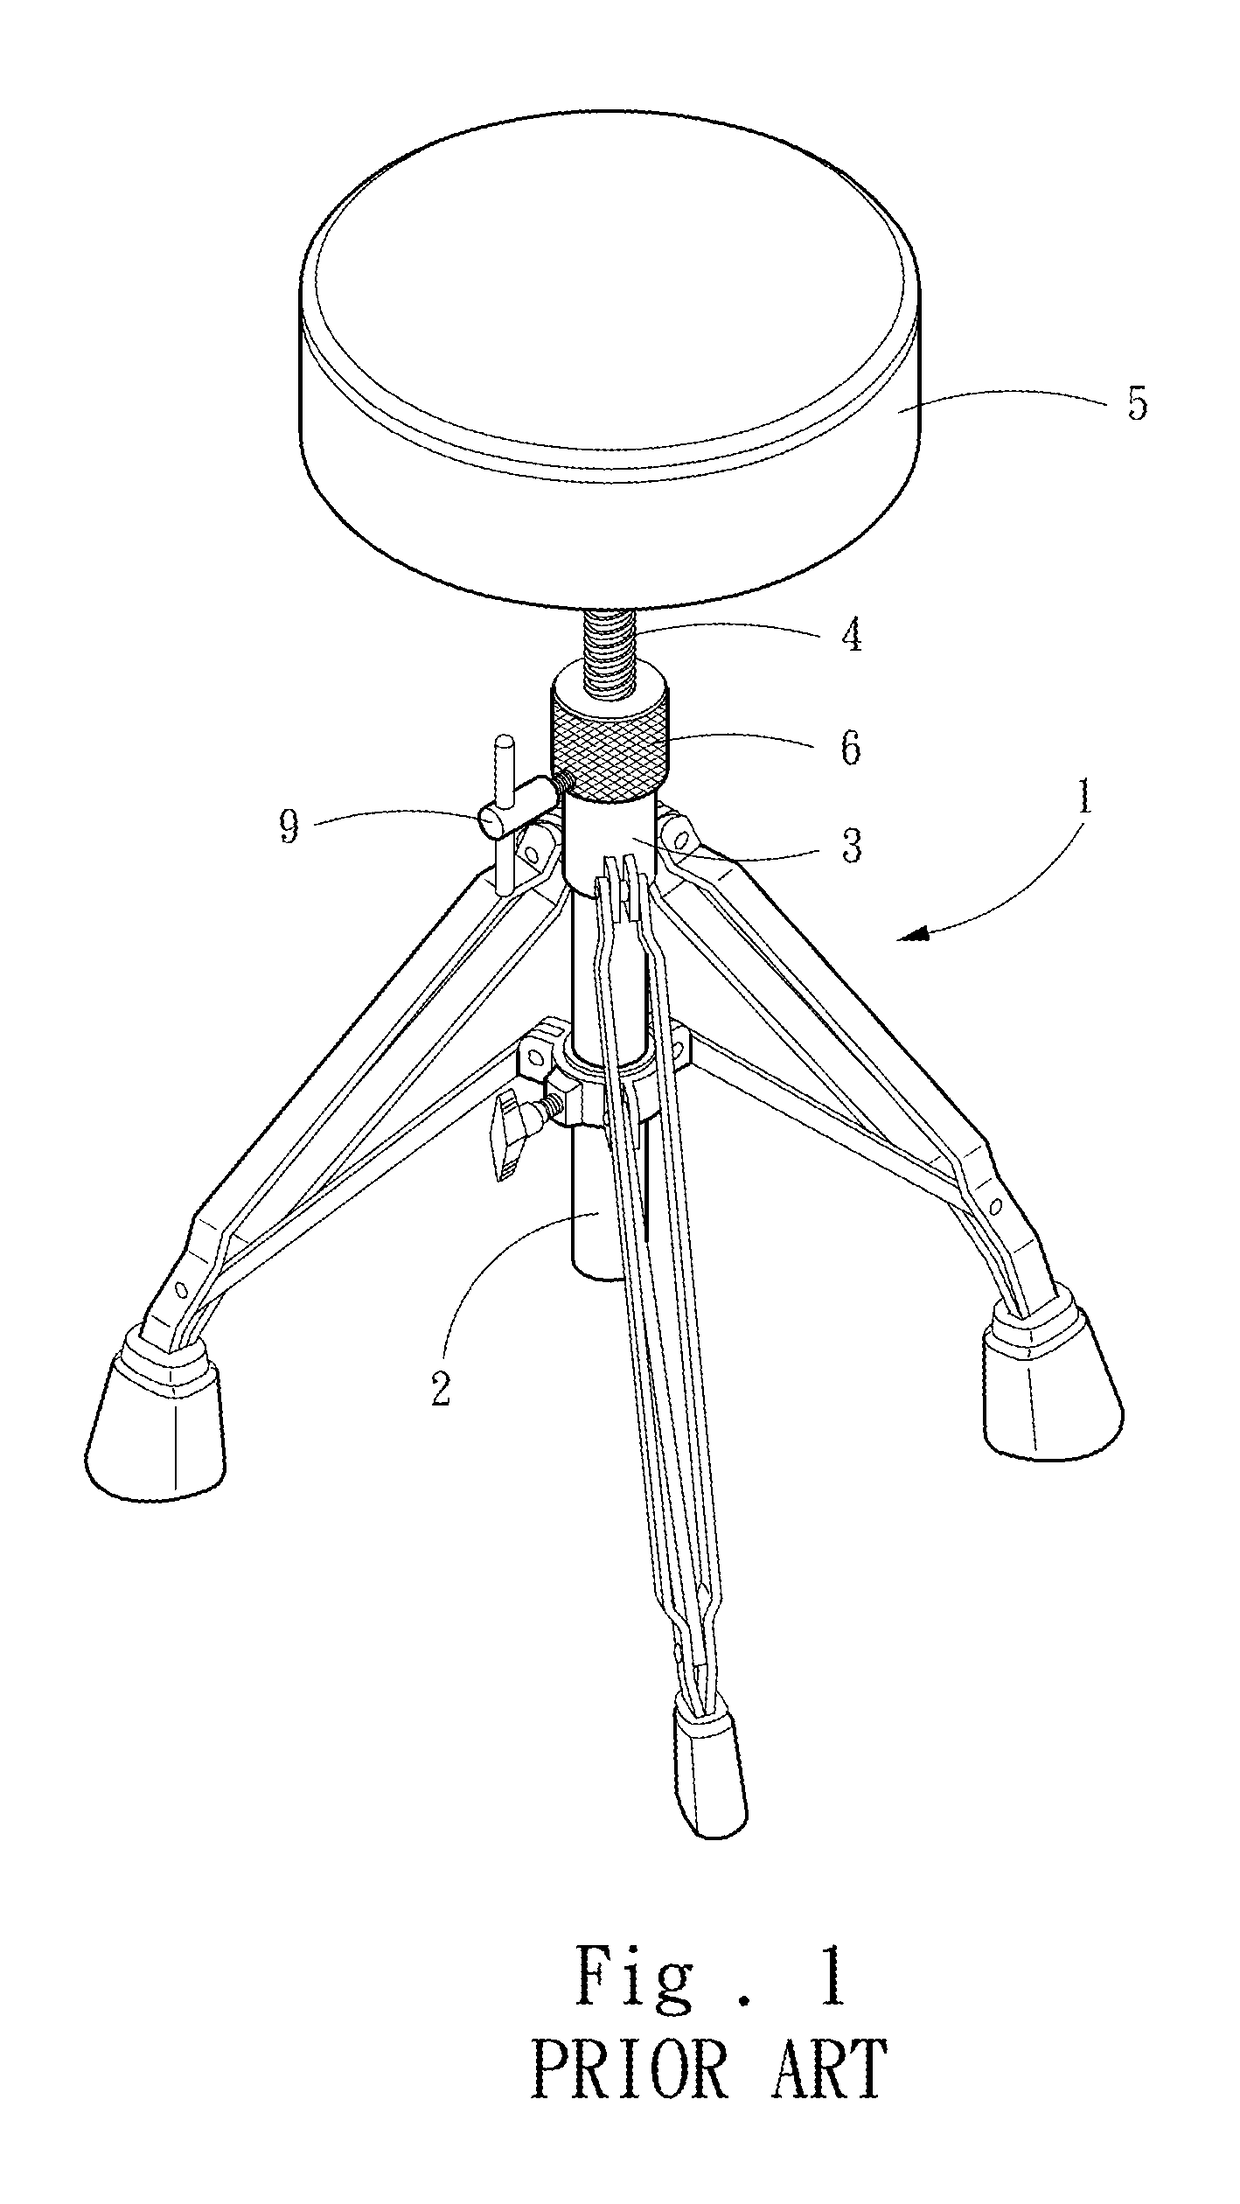 Rapid fixing structure for height adjusting rod of musical instrument chair